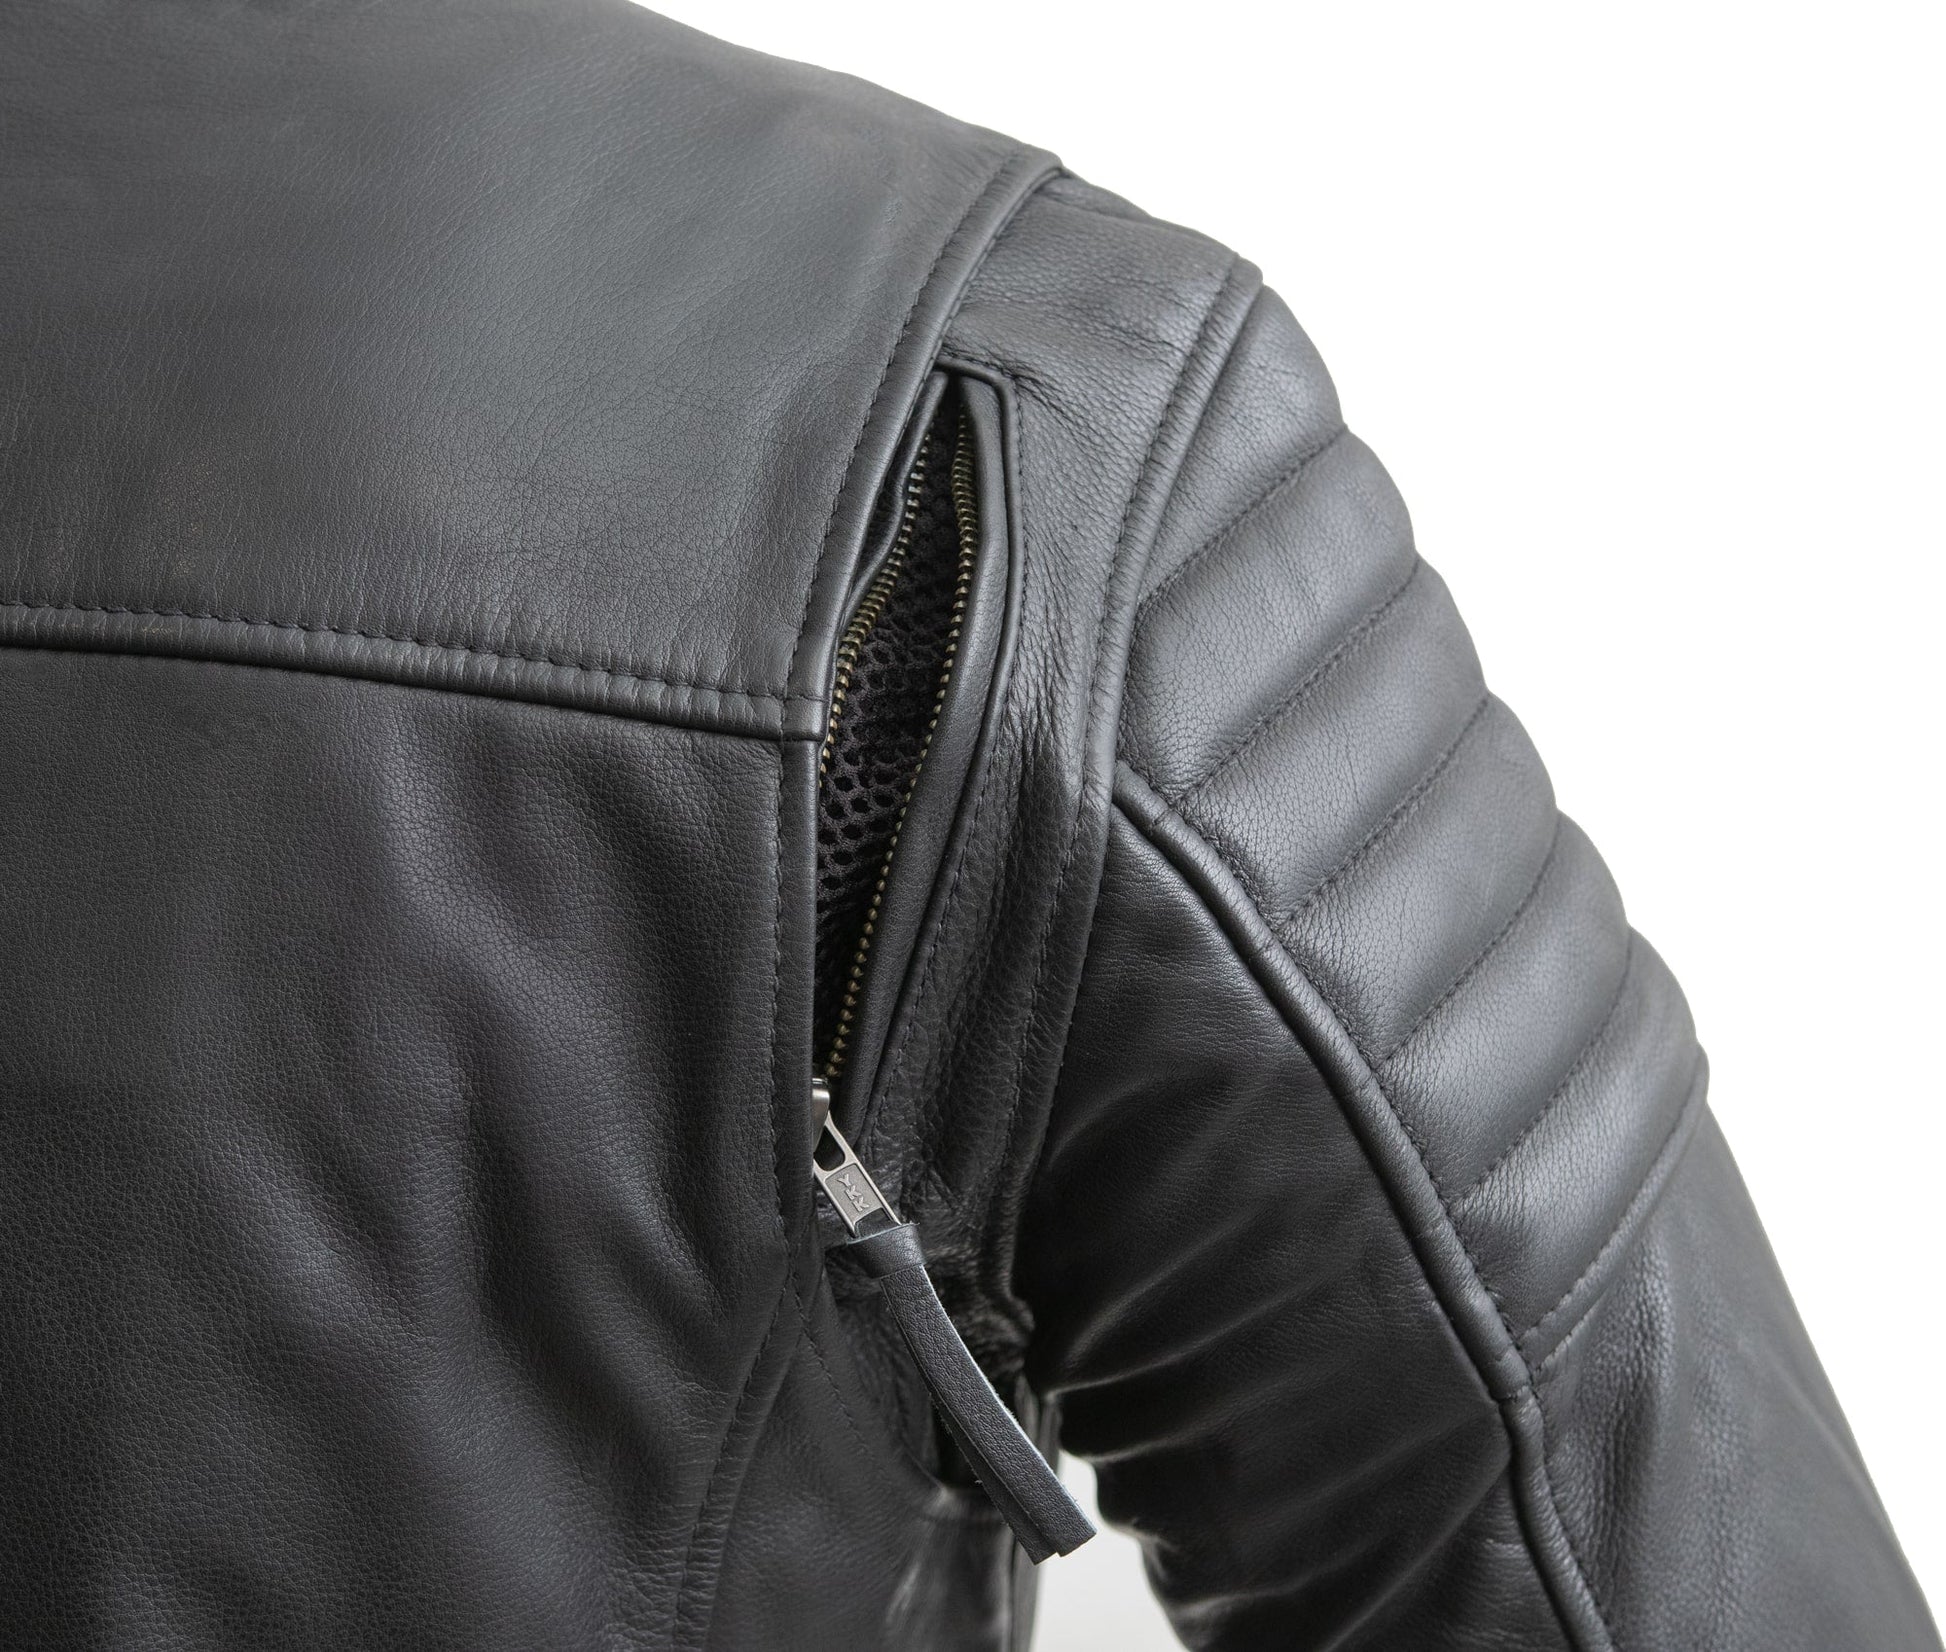 Commuter Men's Motorcycle Leather Jacket Men's Leather Jacket First Manufacturing Company   